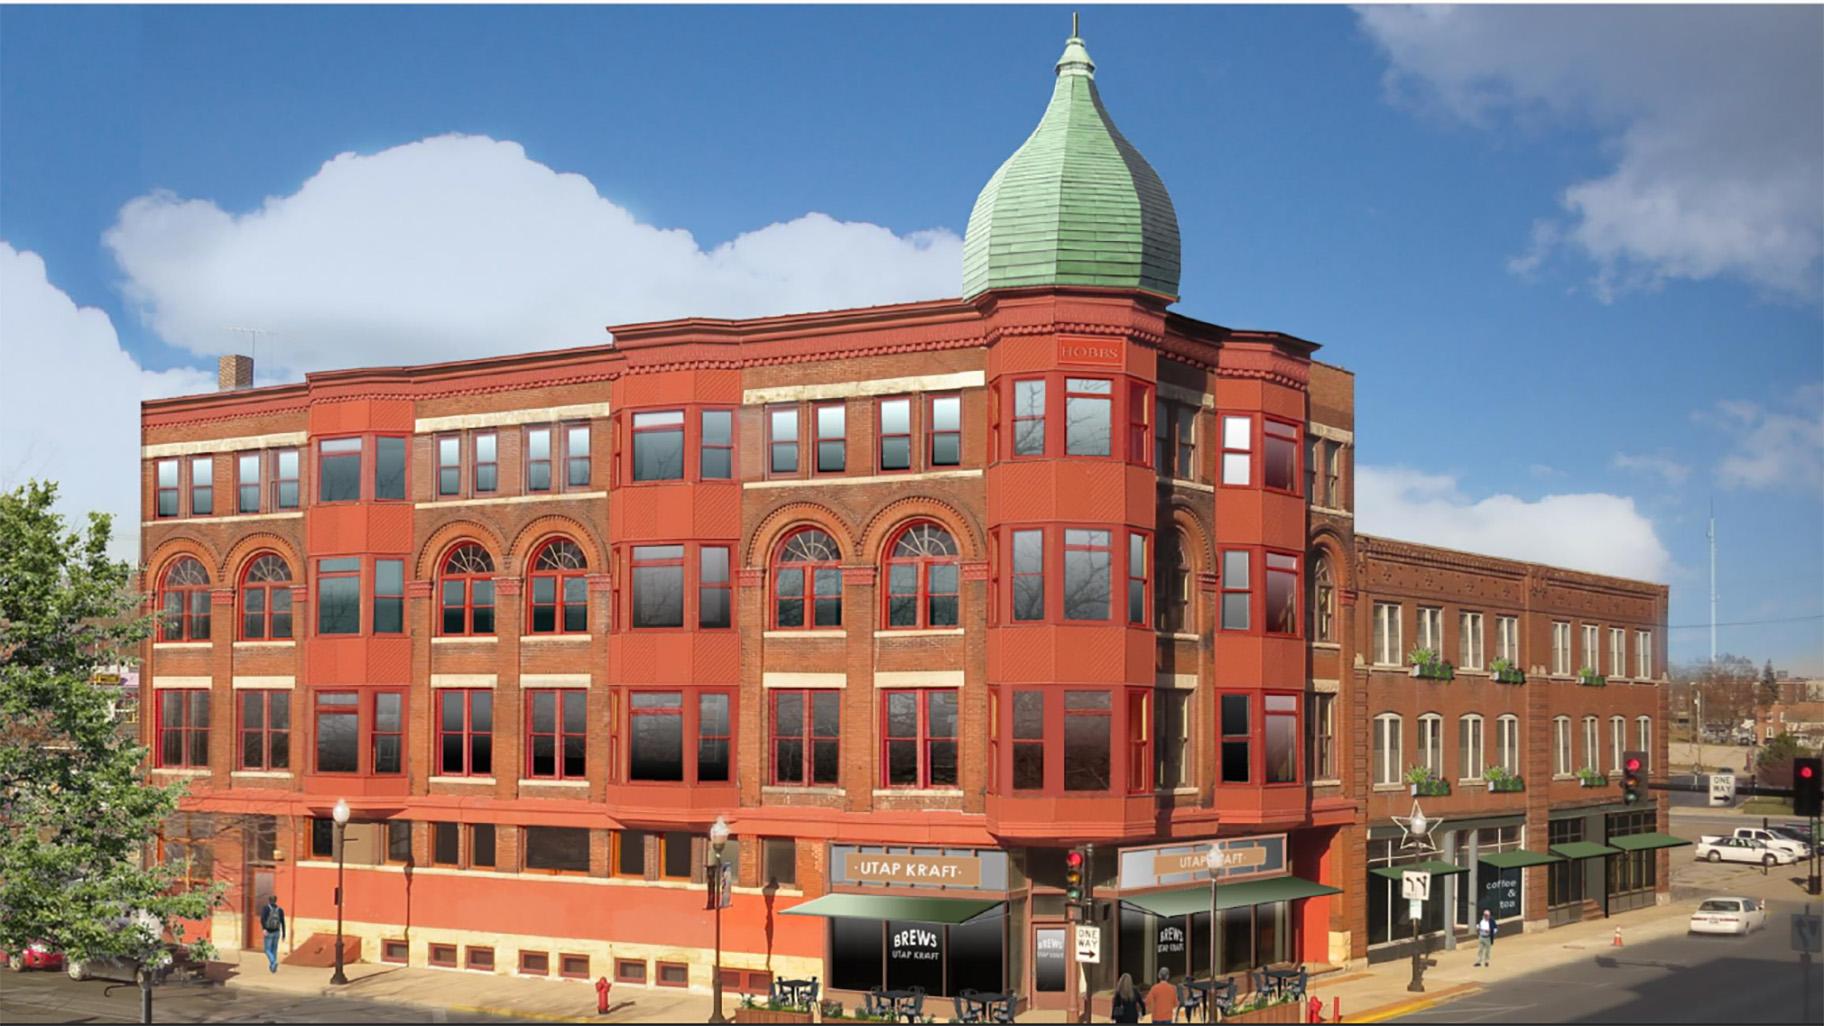 The Hobbs Building in Aurora, pictured in a rendering after development, had long sat vacant on a parcel of land one block away from the Fox River before the city reached a deal with developers. (City of Aurora)